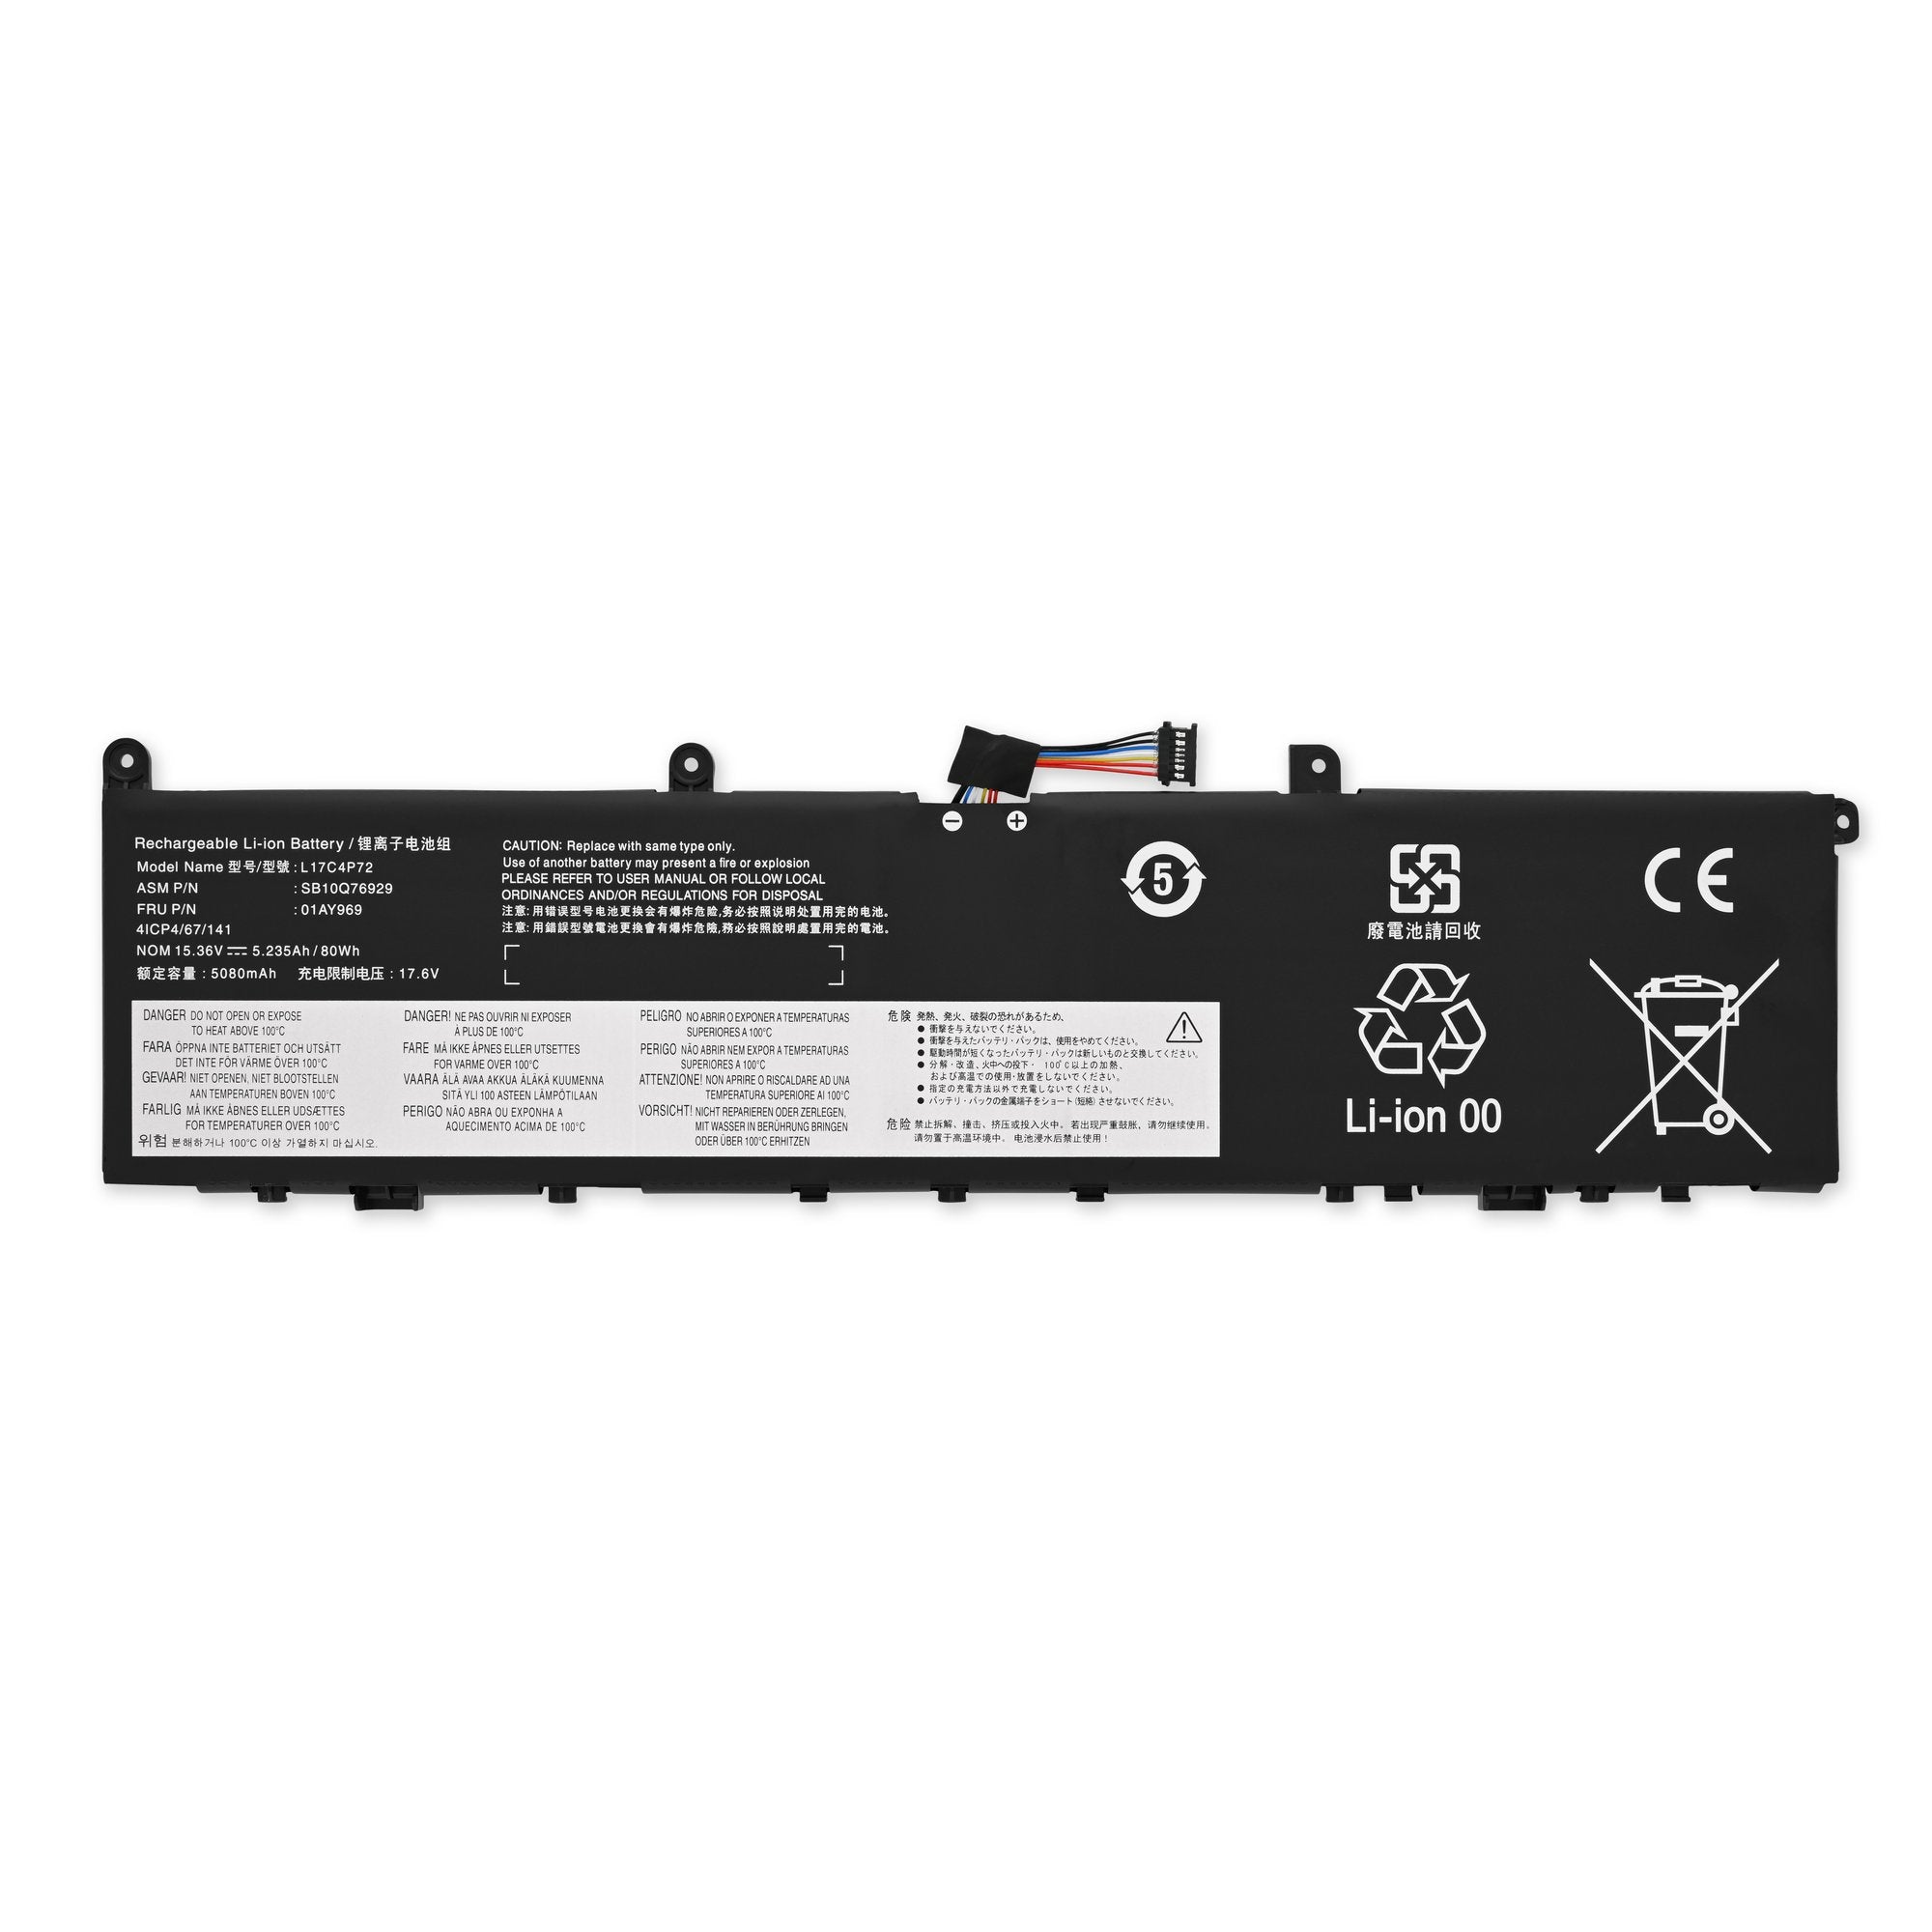 Lenovo ThinkPad P1 and X1 Extreme Battery New Part Only